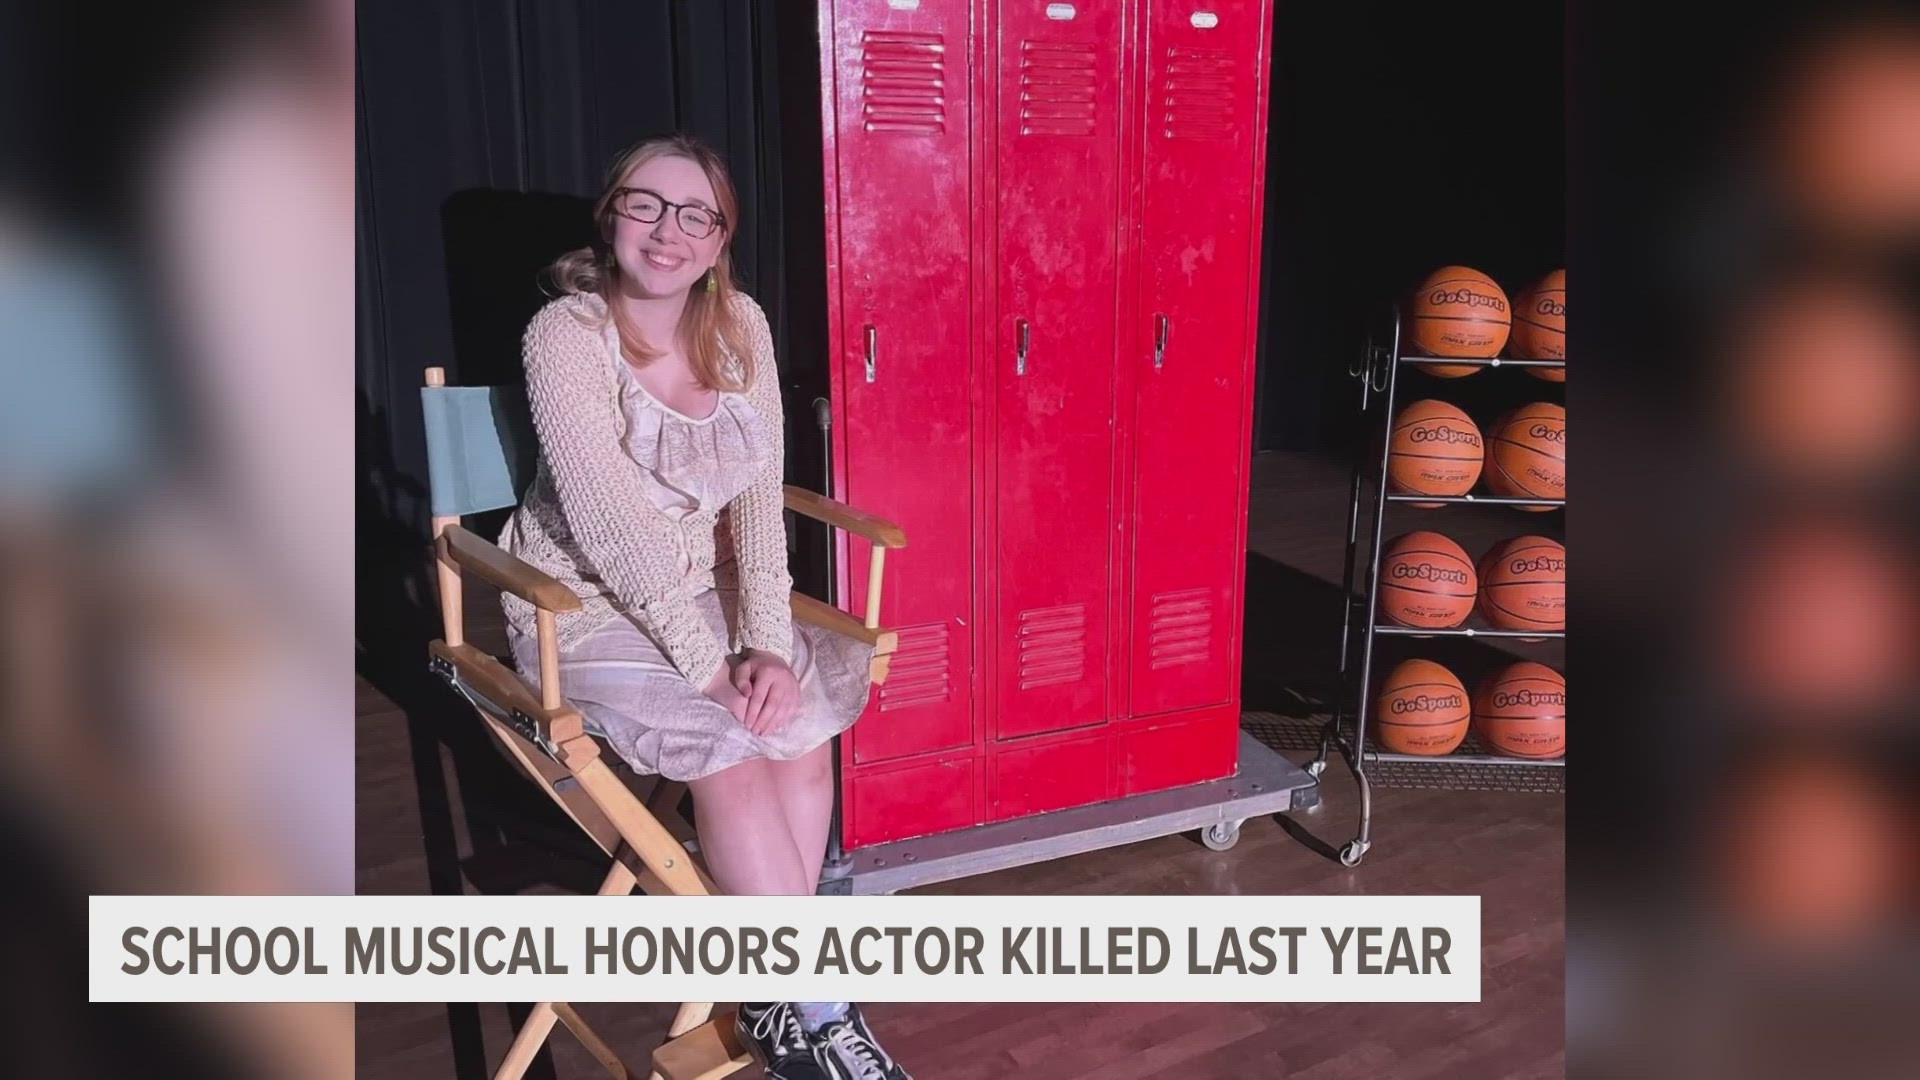 17-year-old Tessa Stanley was hit by a vehicle and killed in December while walking to her mailbox. She was cast as Ursula in FHE's production of The Little Mermaid.